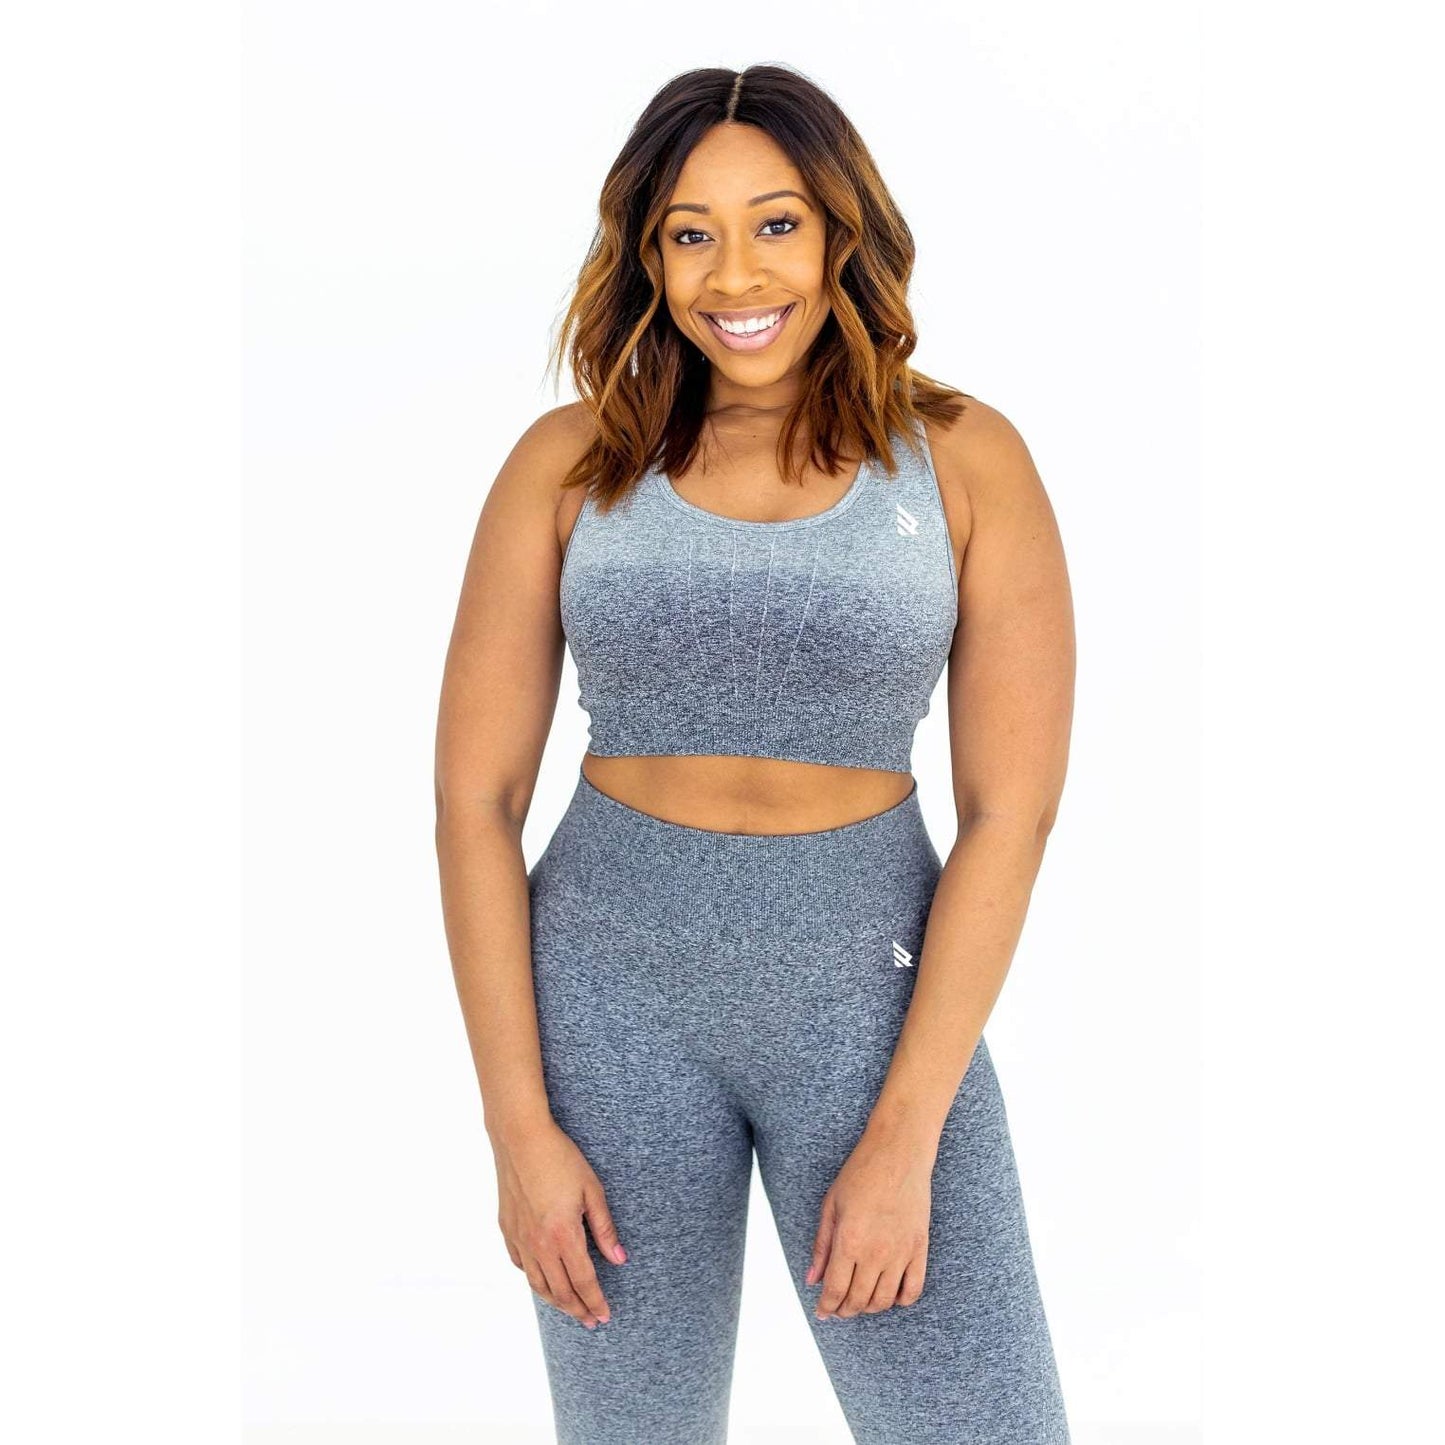 Rebelious Ombré Sports Bra in Willow Gray